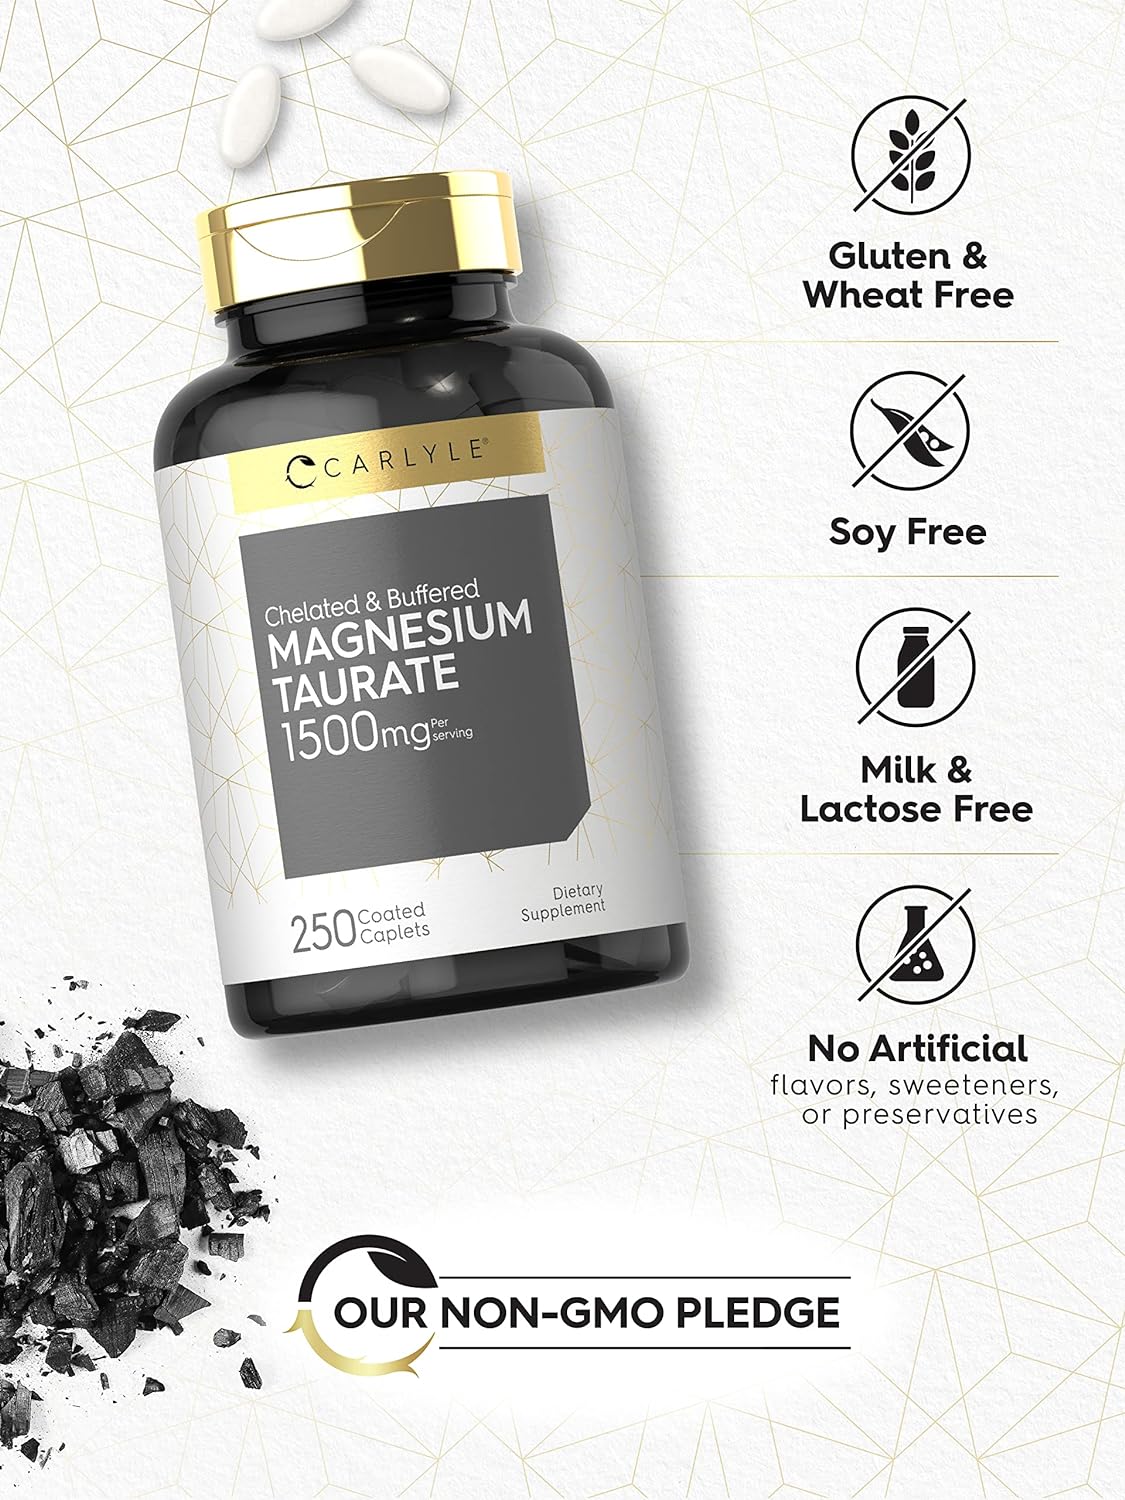  Magnesium Taurate 1500mg | 250 Caplets | Chelated and Buffe